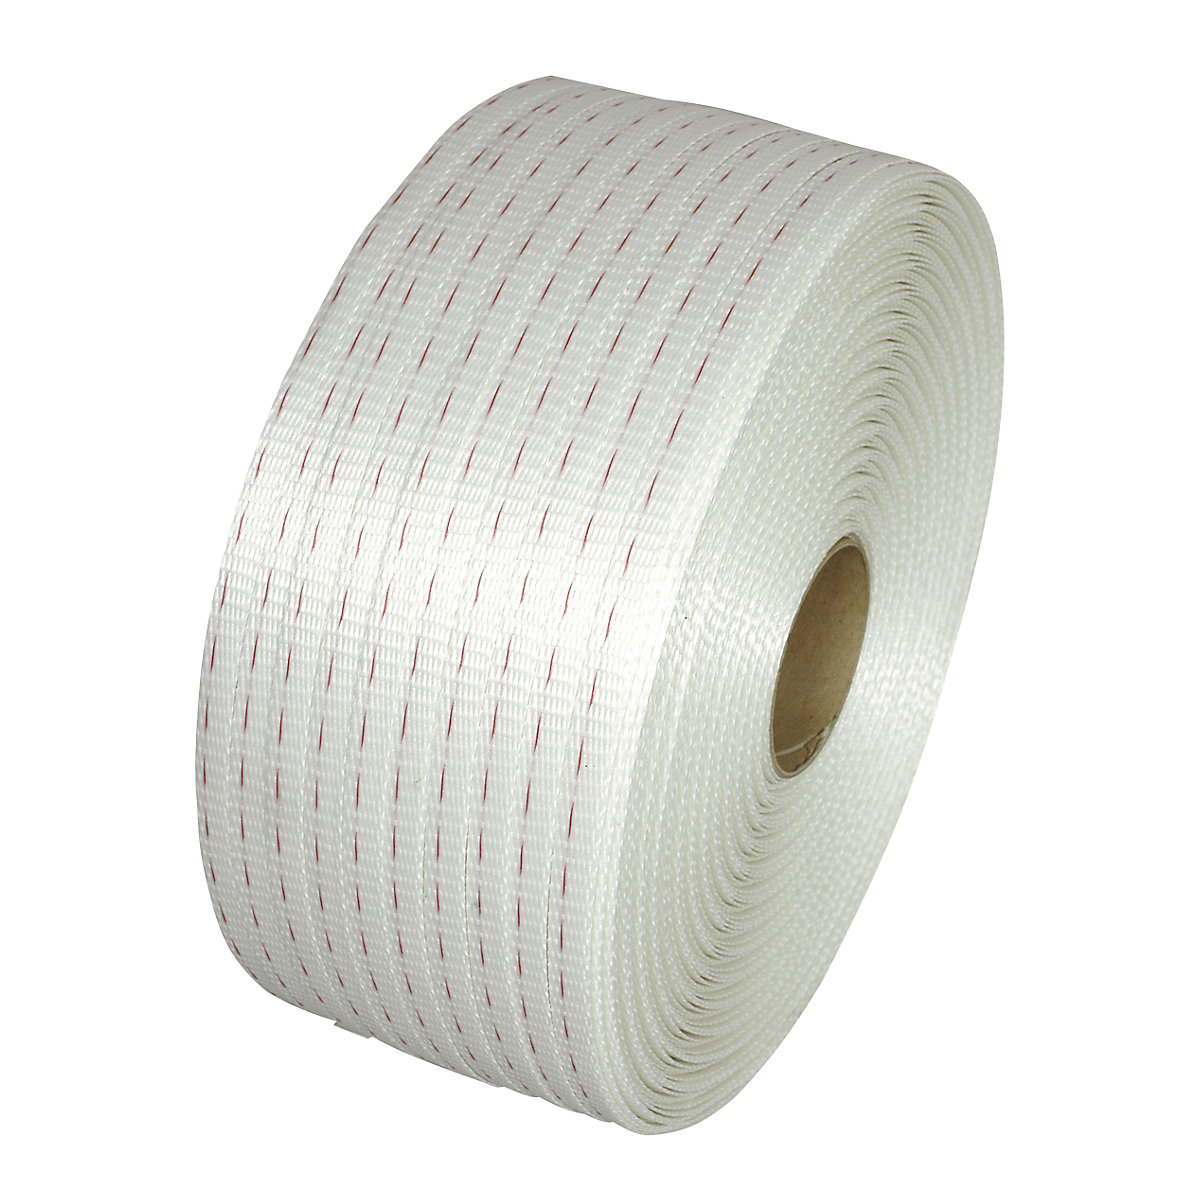 Reinforced PET strapping, woven, for strap dispensers, core Ø 76 mm, strap width 13 mm, pack of 2-1